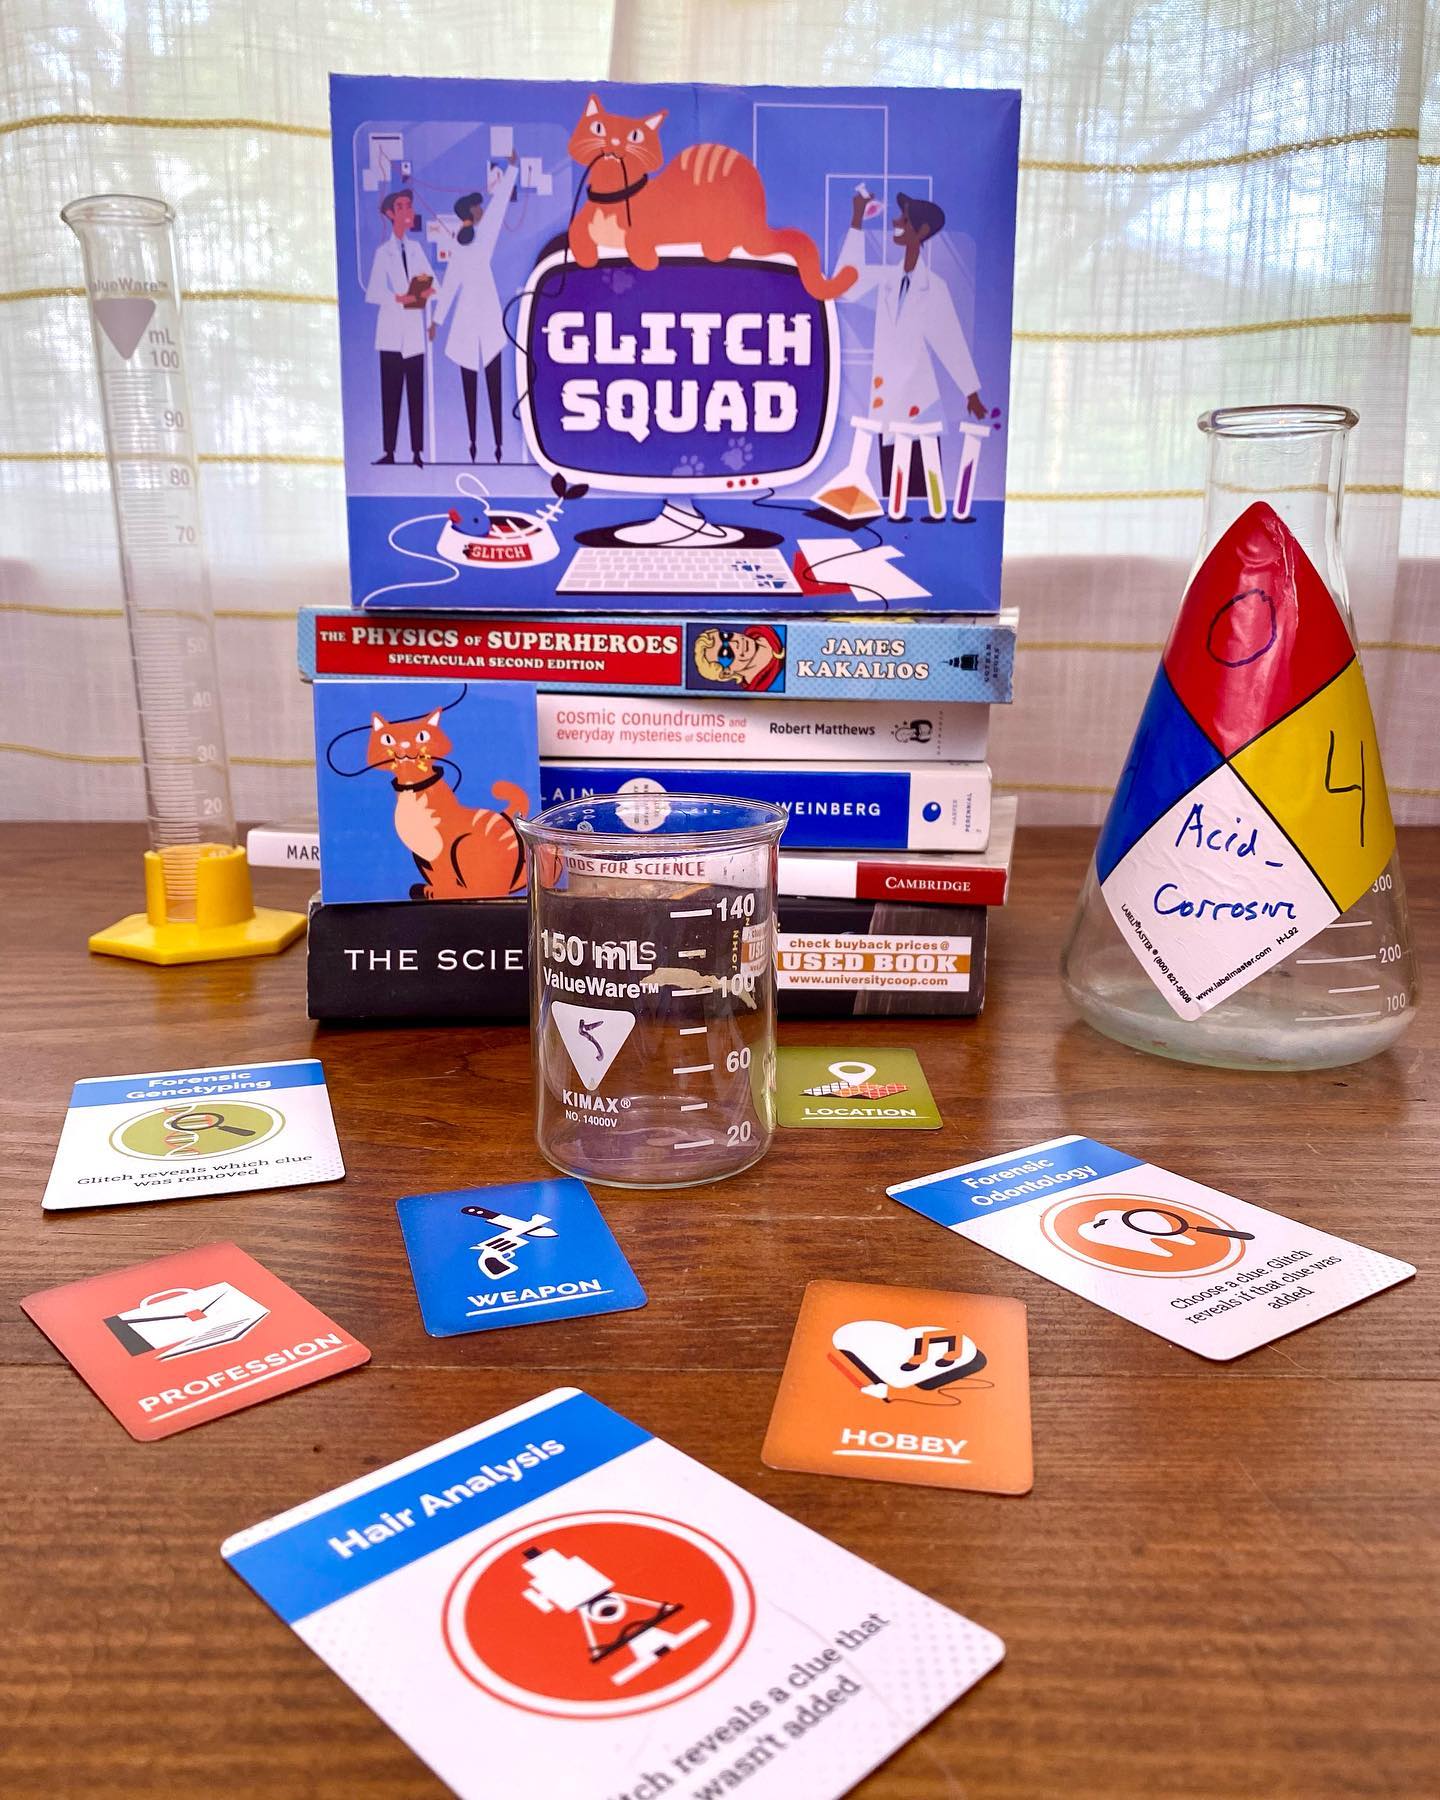 There are only two hours left to back Glitch Squad! Don’t miss out on grabbing this game of foiled forensics and a crafty kitty 🐱⚗️

#boardgames #indieboardgame #bgg #tabletopgames #resonym #gamenight #kickstartergames #kickstarter #cardgame #science #forensics #cat #lastchance #glitch